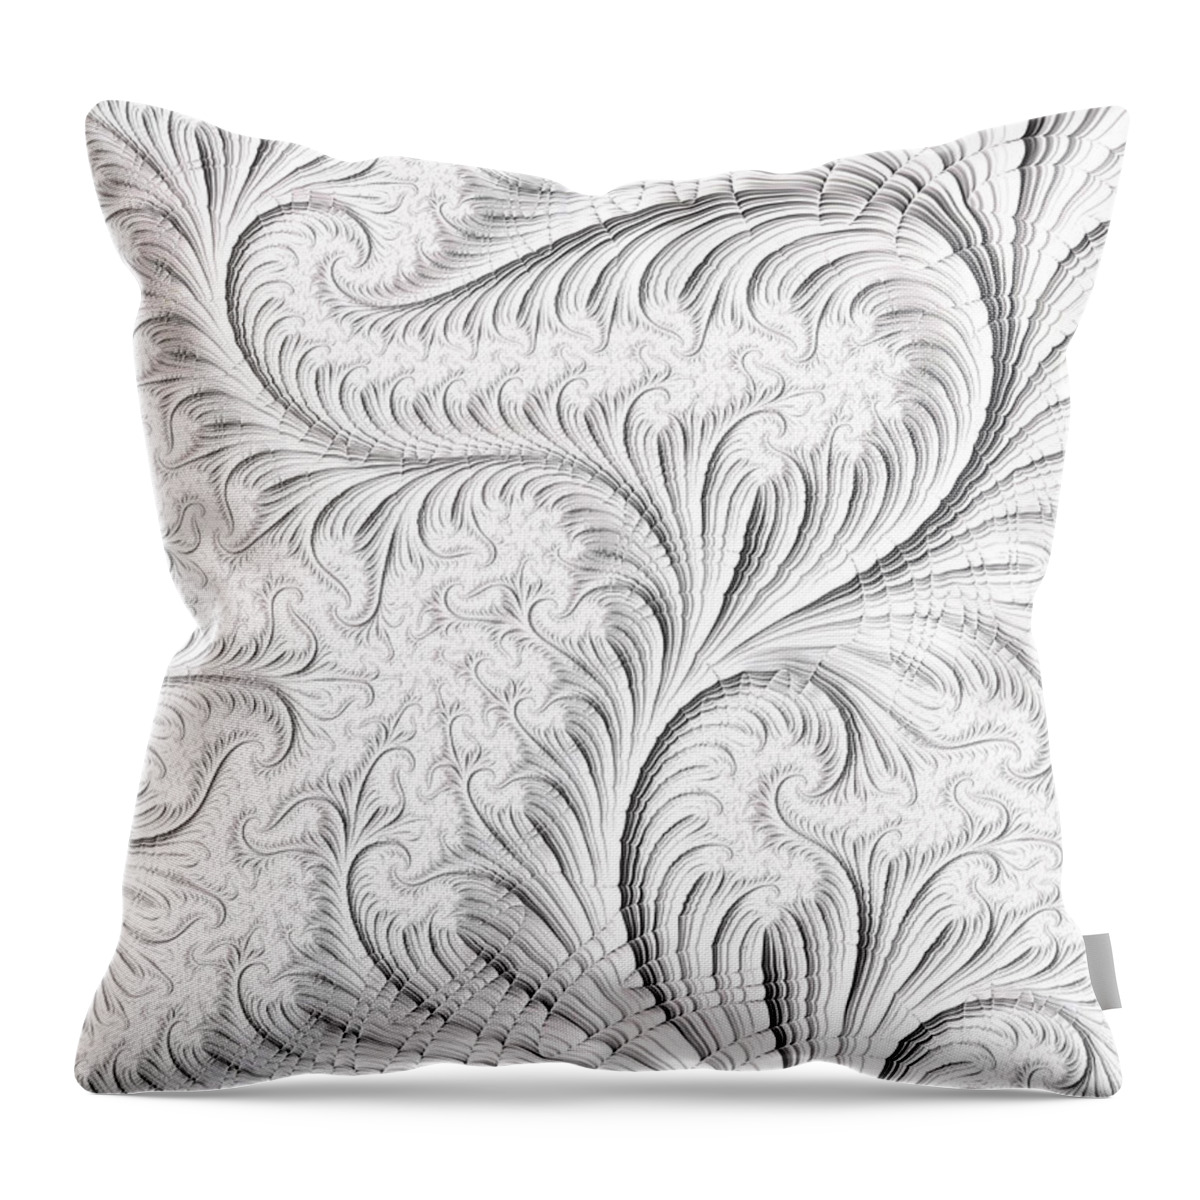 Abstract Throw Pillow featuring the digital art Feathered by Michele A Loftus